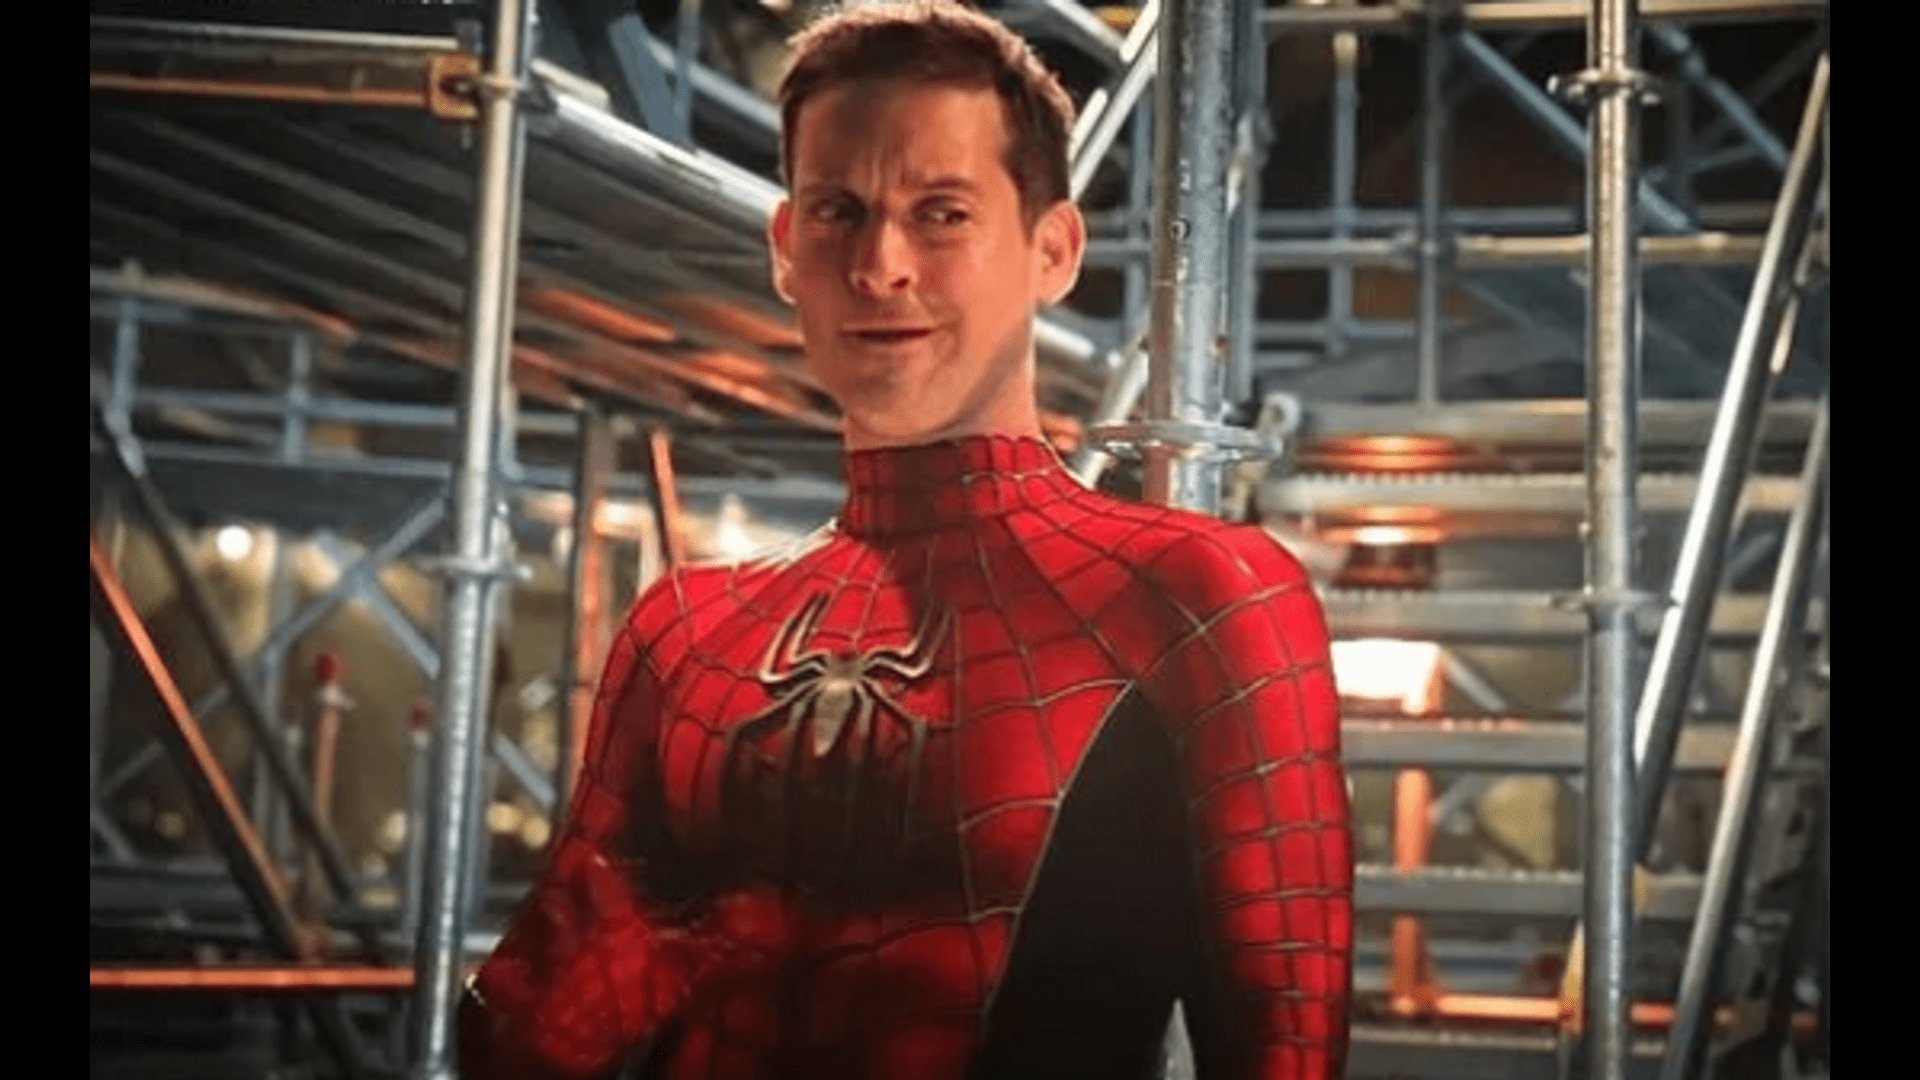 ”director-sam-raimi-hinted-at-the-continuation-of-spider-man-with-tobey-maguire”